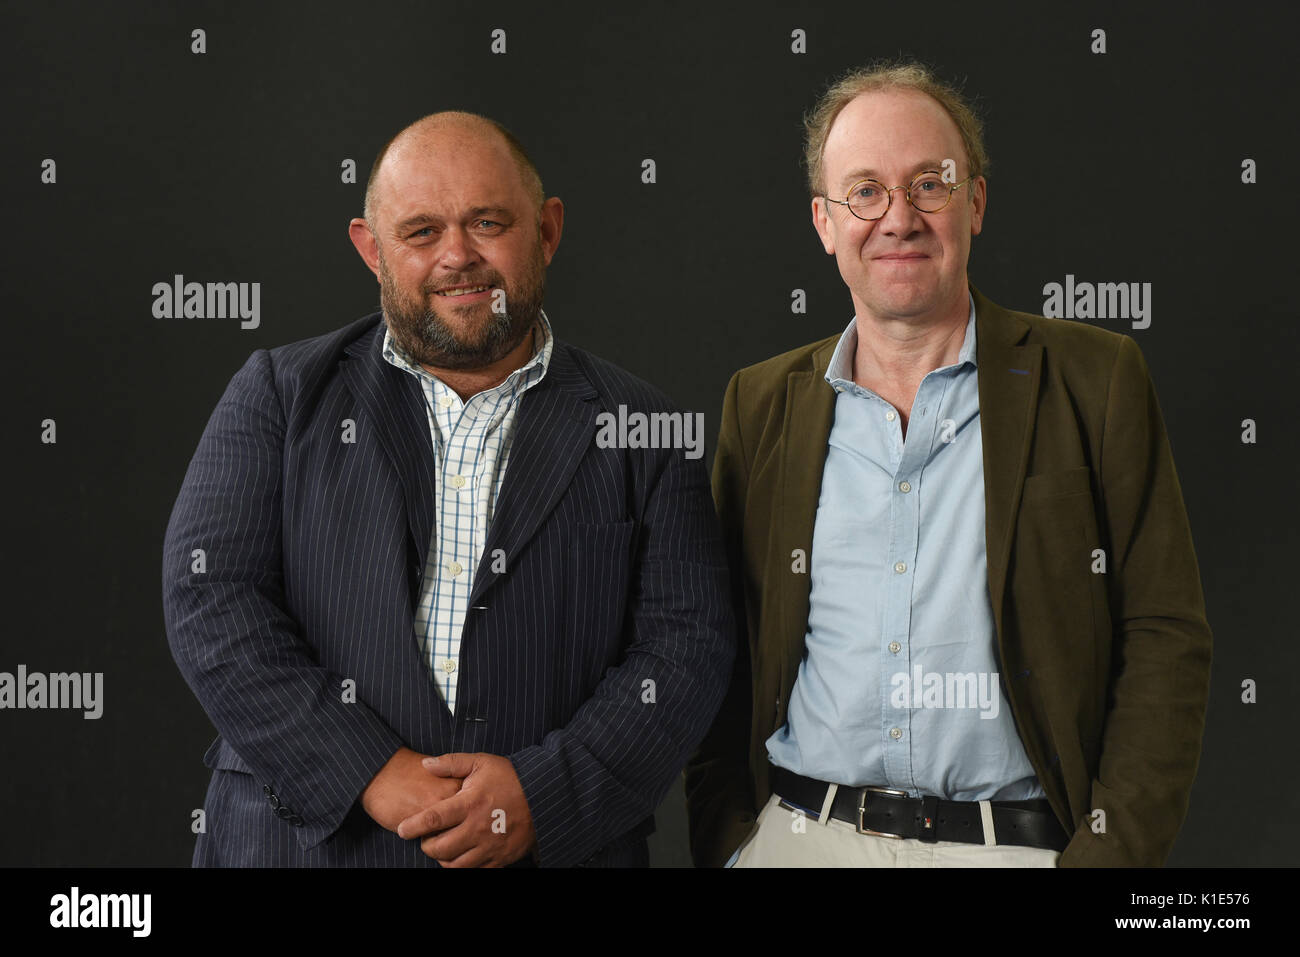 Edinburgh, Scotland, UK. 26th Aug, 2017. The Edinburgh International Book Festival Saturday 26th August. L-r Martin Pearce author of Spymaster a book about his uncle who was the Head of MI6 with Ben Macintyre author of SAS: Rogue Heroes appears at the book festival along with Martin Pearce. Credit: Stuart Cobley/Alamy Live News Stock Photo